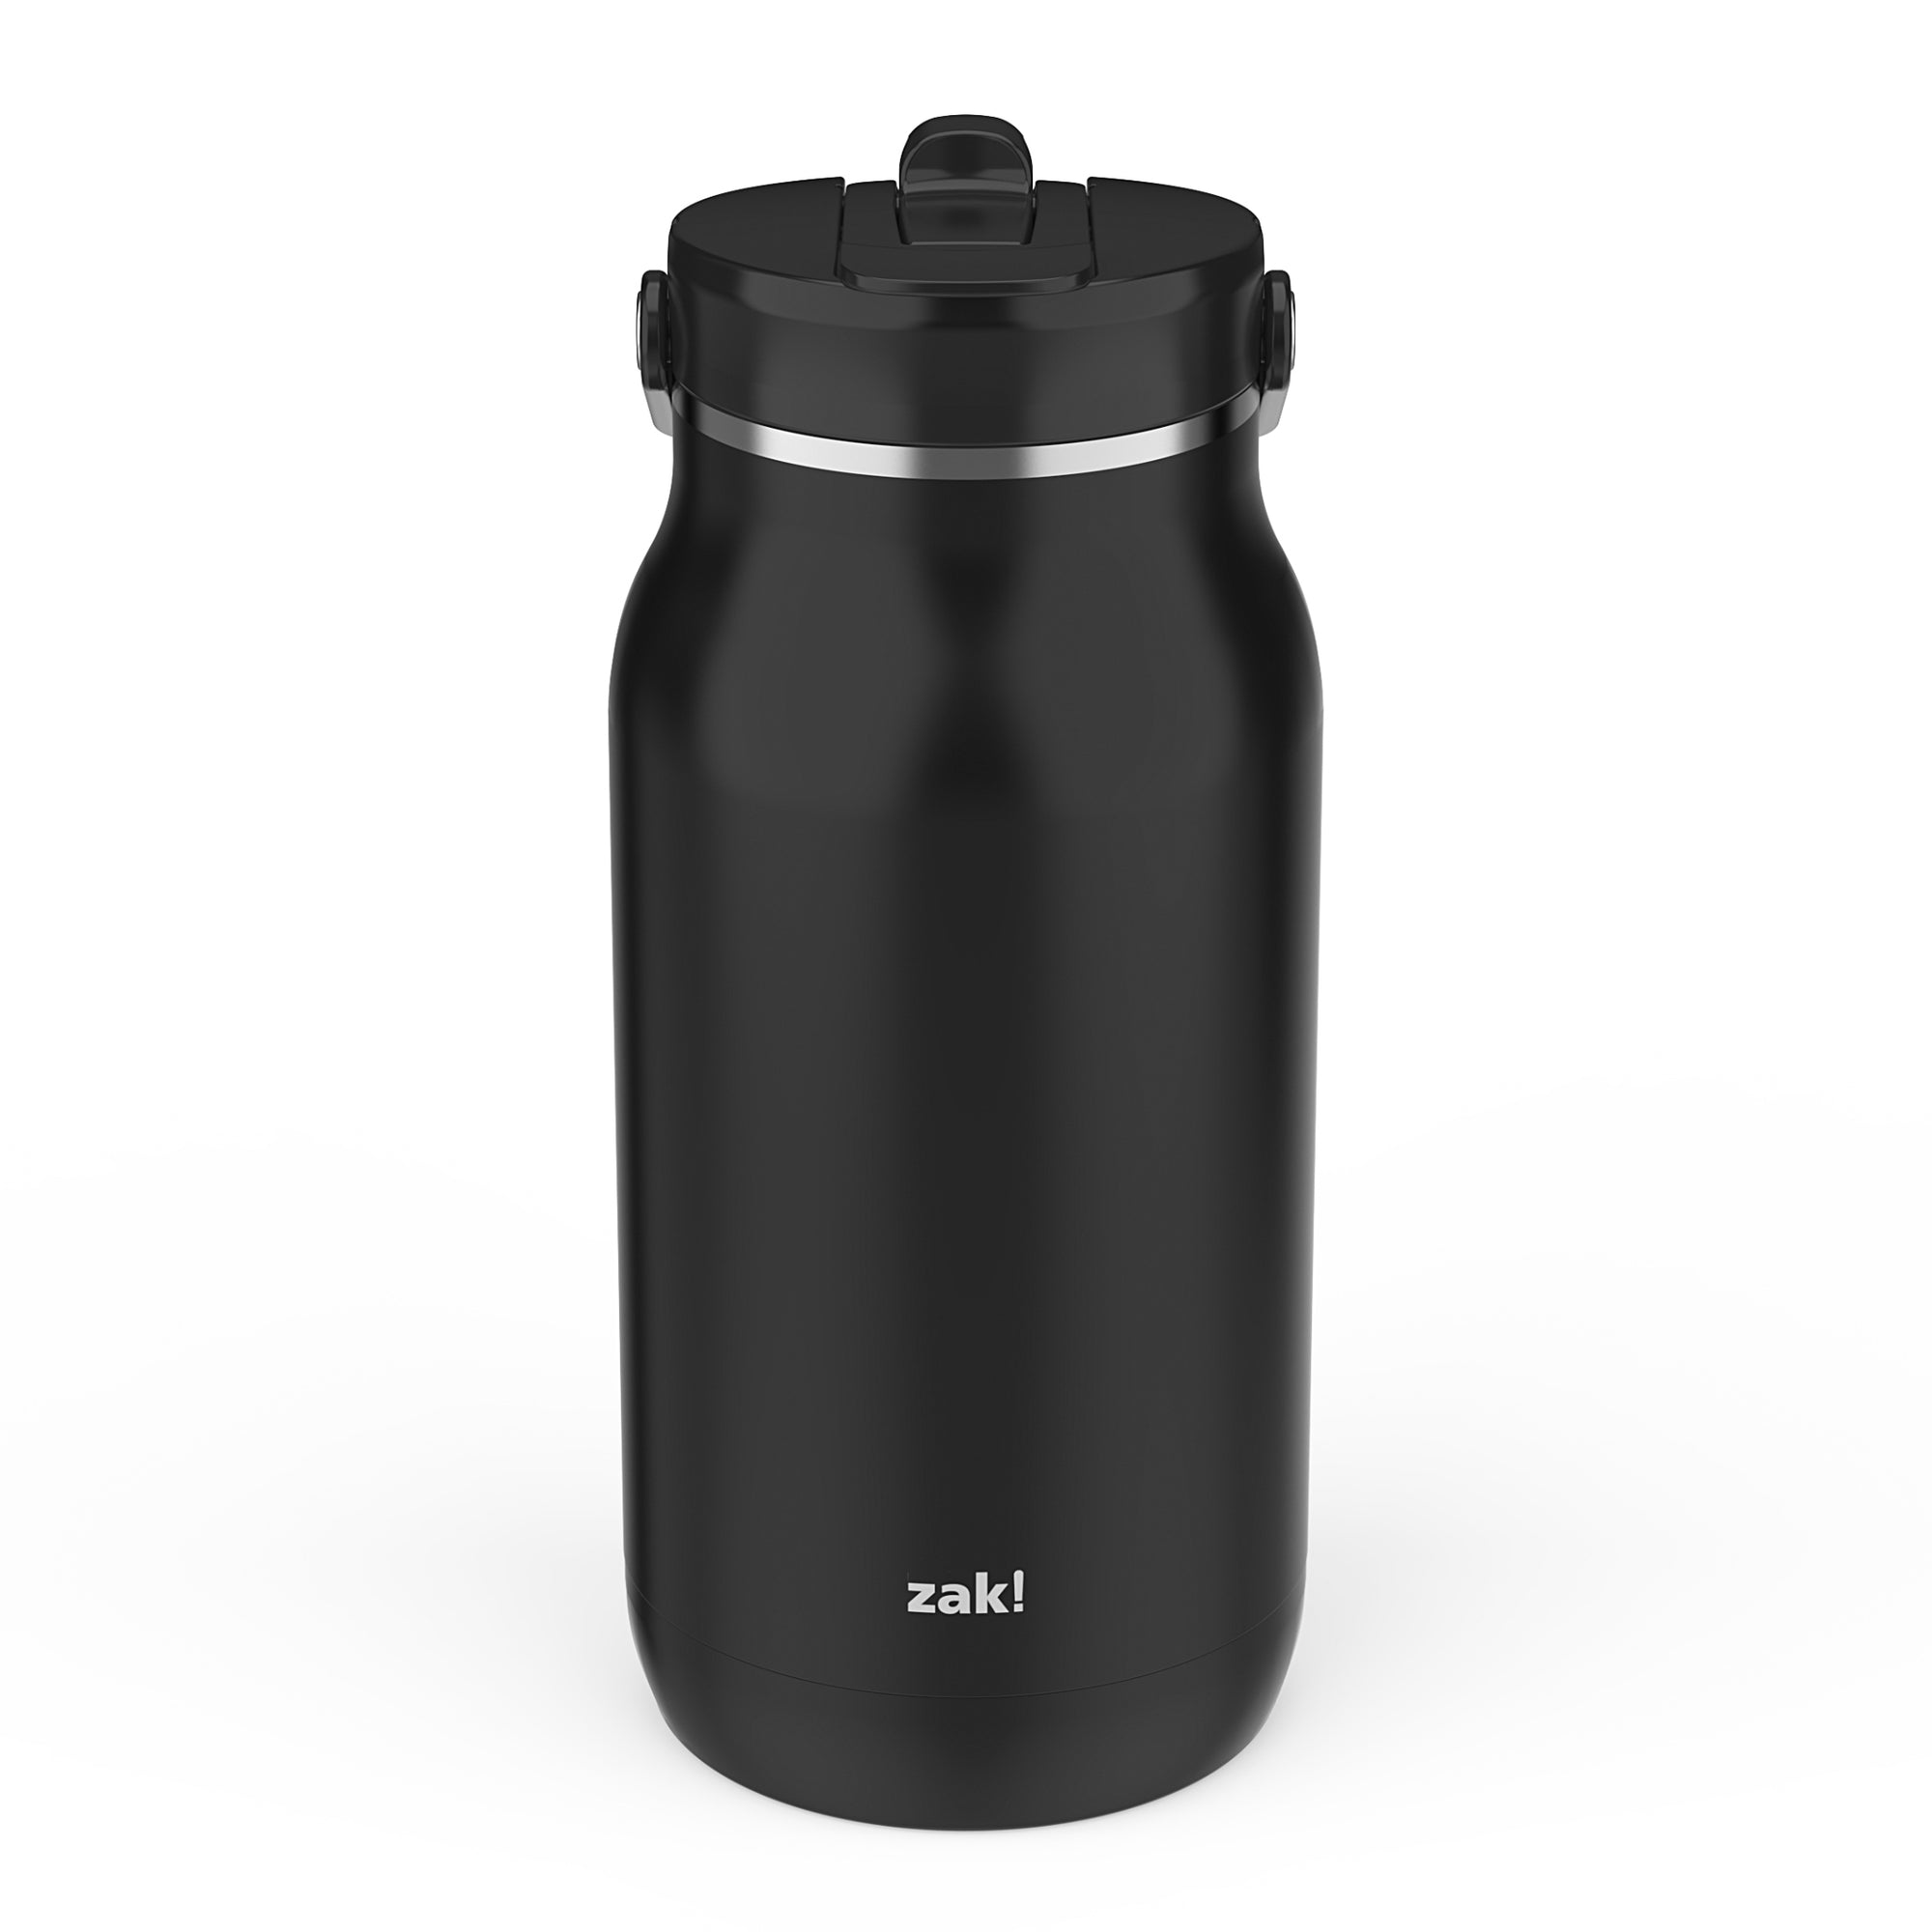 Harmony Recycled Stainless Steel Insulated Hot & Cold Tumbler - Ebony, 64 ounces